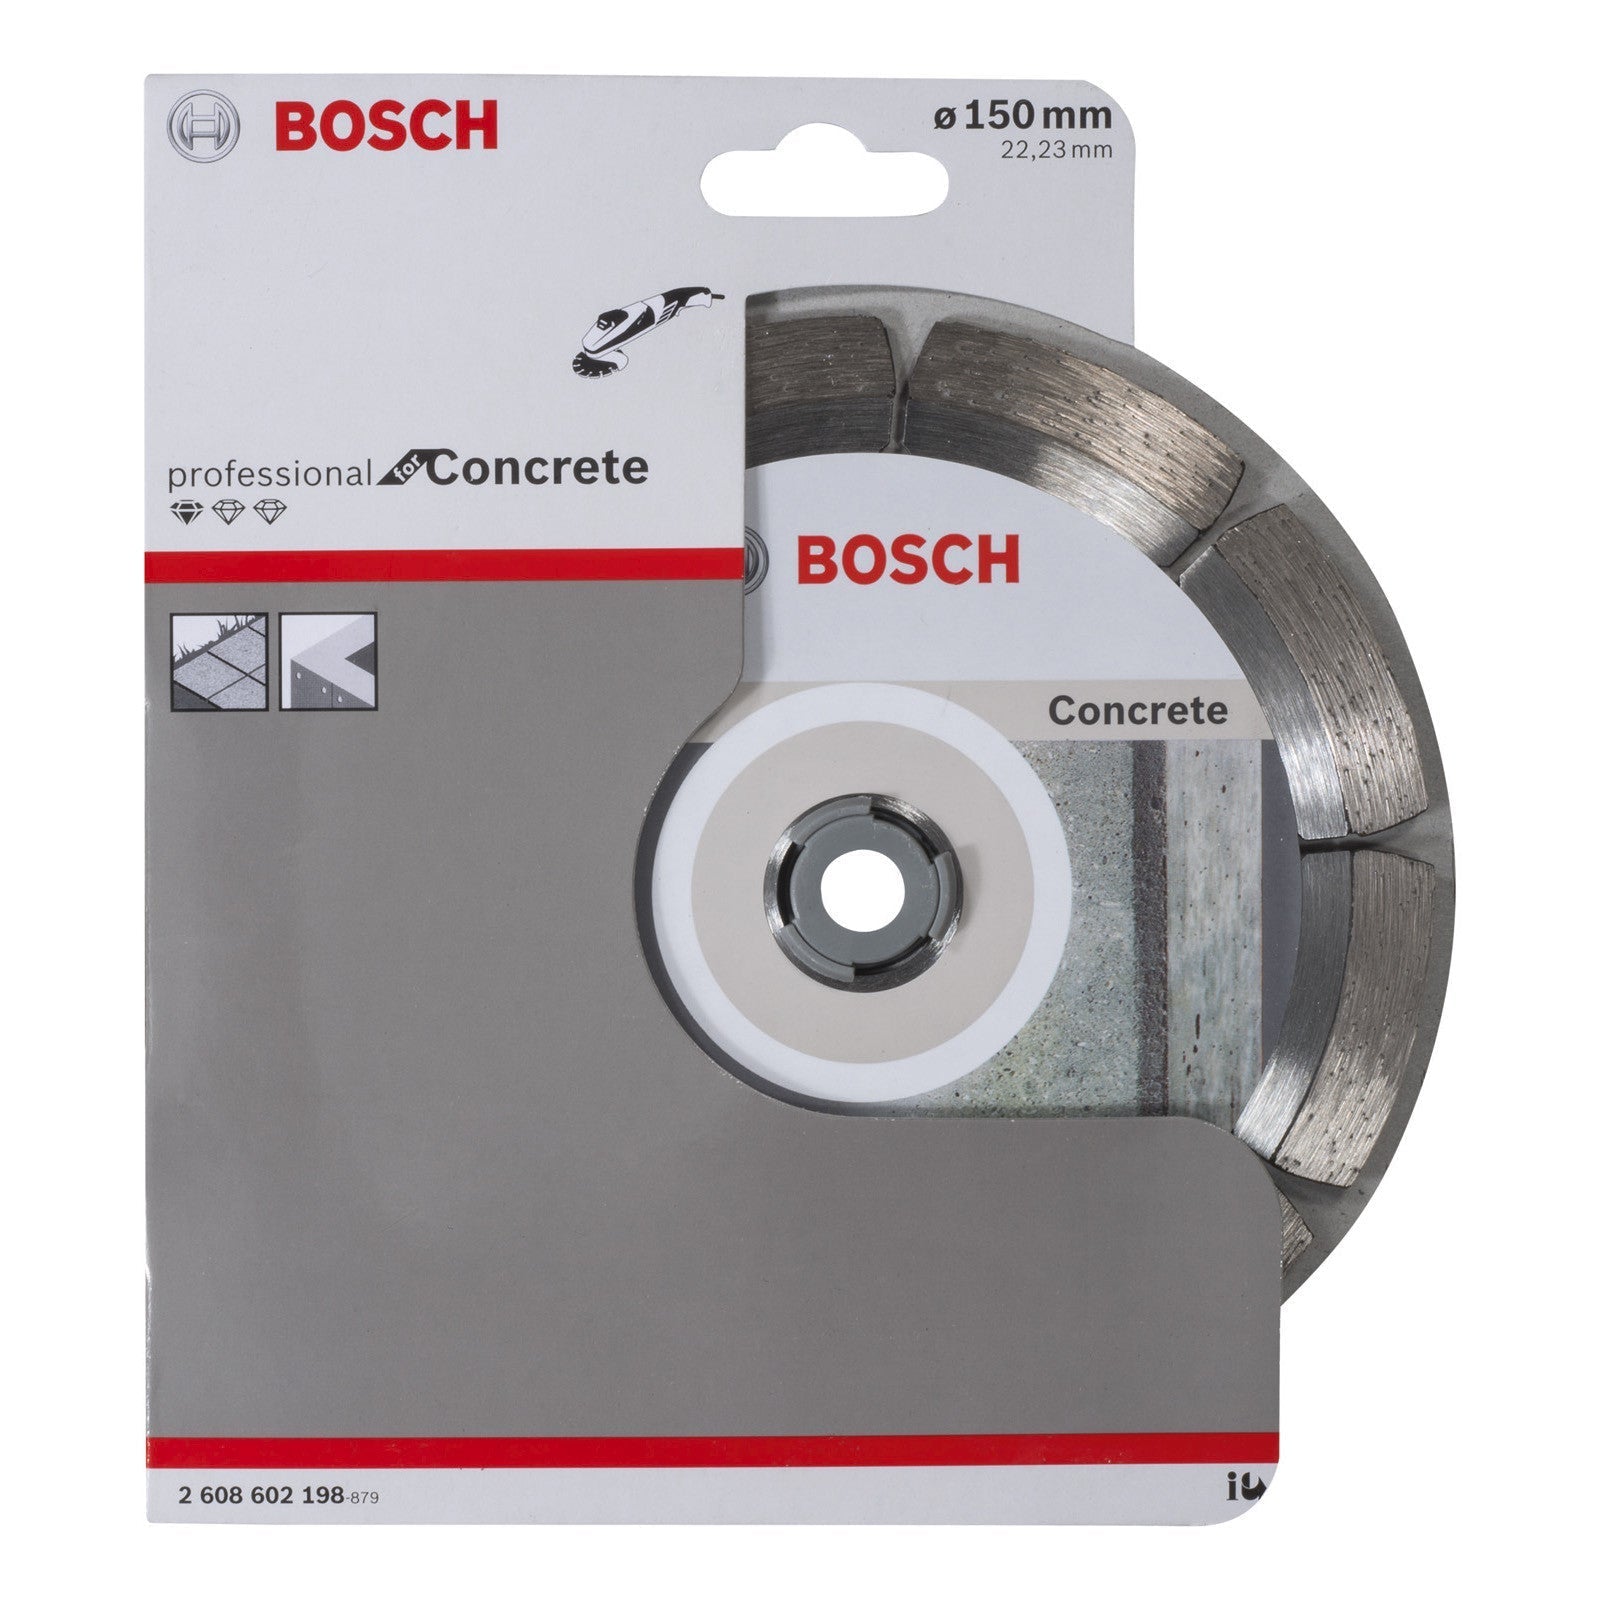 Bosch Standard for Concrete 150 x 22,23 x 2,0 segmented 2608602198 Power Tool Services